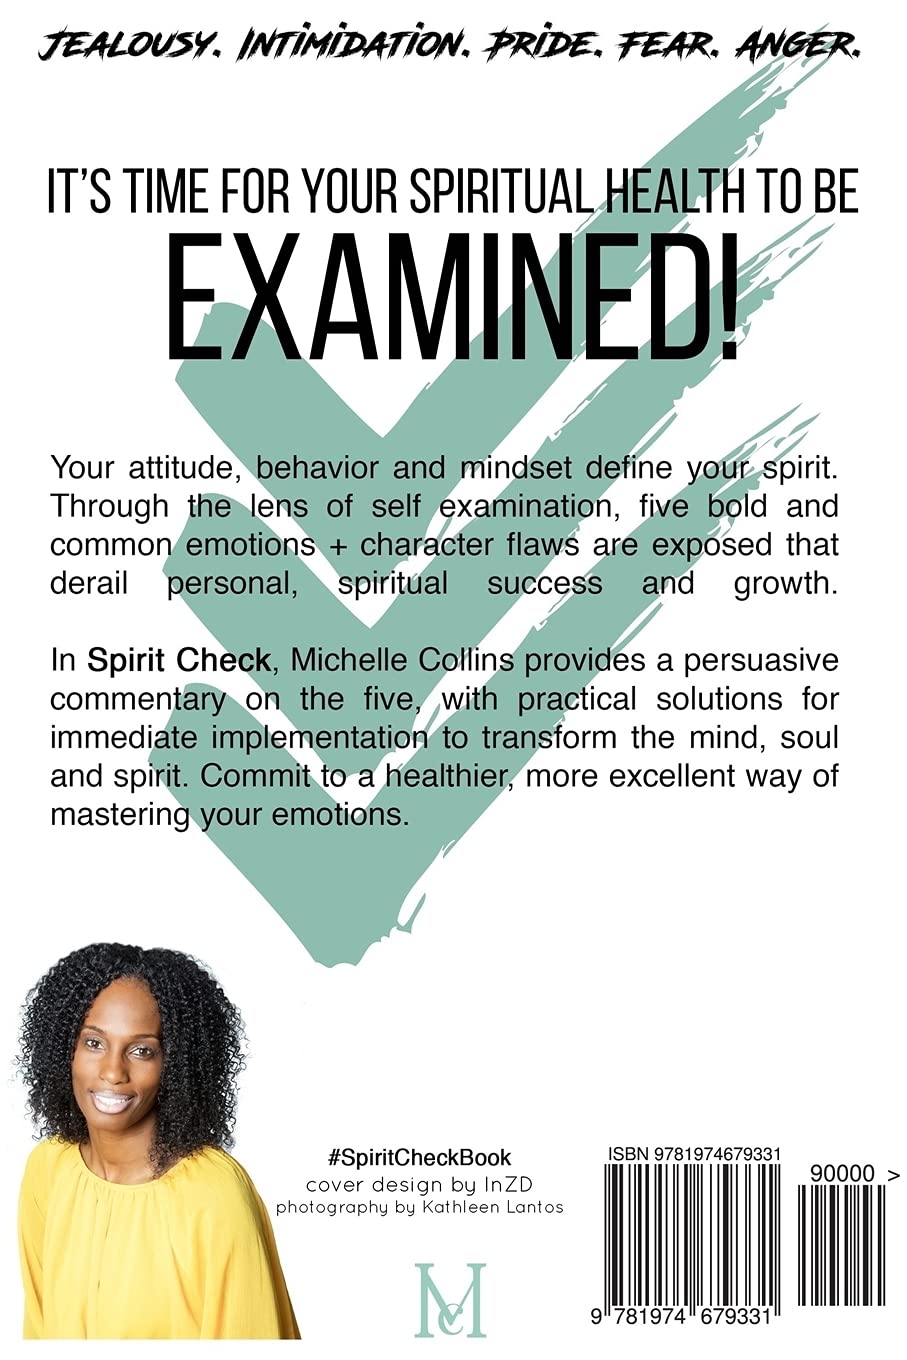 Spirit Check: Practical Solutions for Emotional Mastery Paperback – September 8, 2017 by Michelle Collins